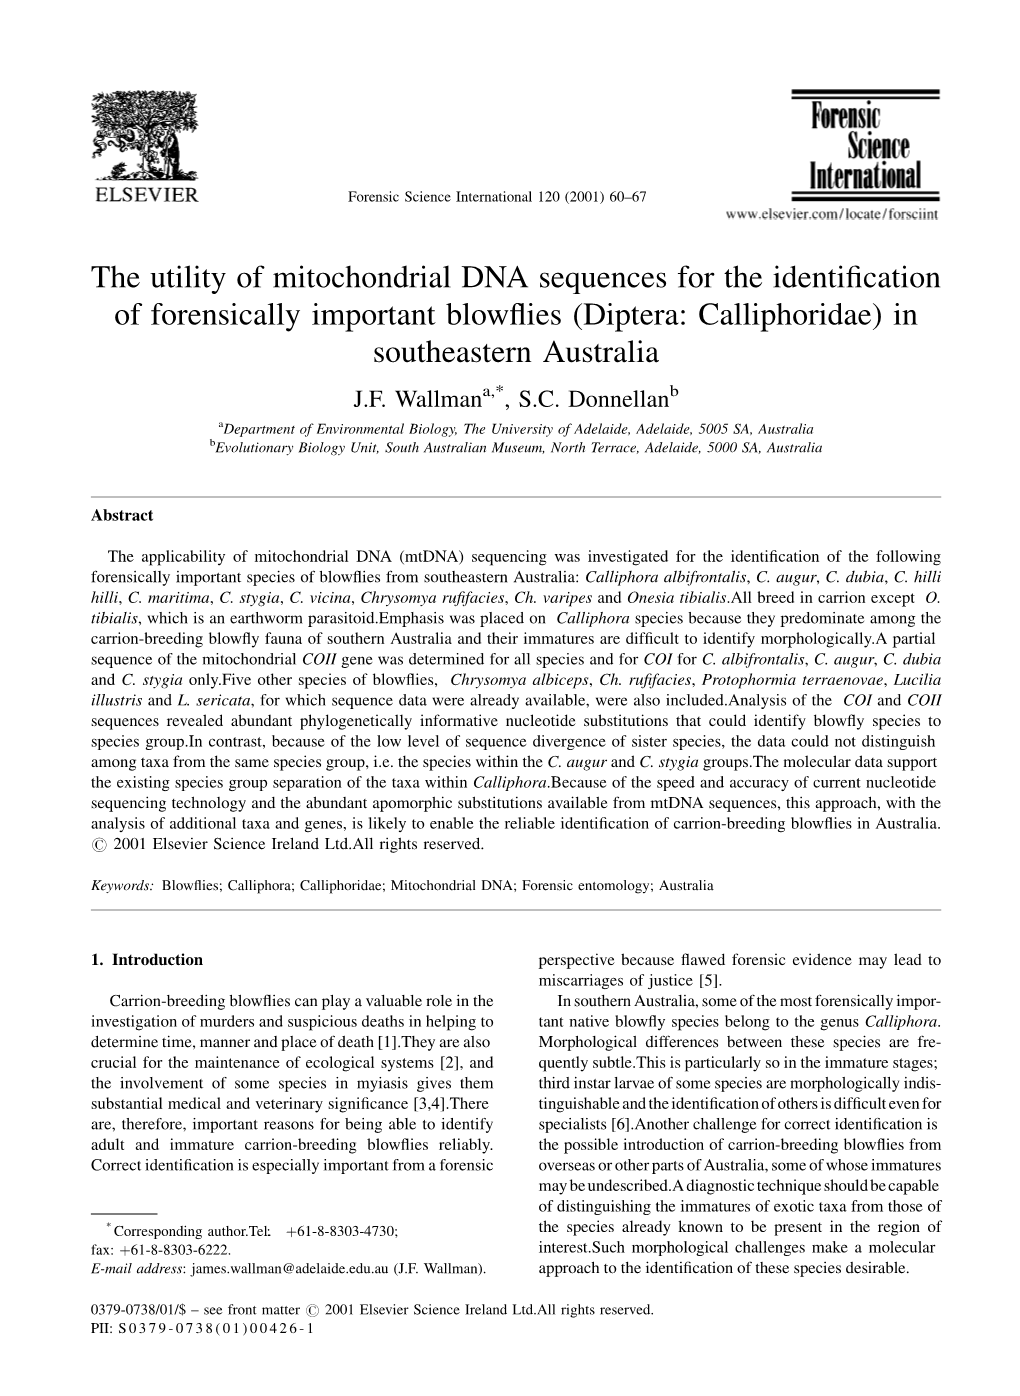 The Utility of Mitochondrial DNA Sequences for the Identification of Forensically Important Blowflies (Diptera: Calliphoridae) I